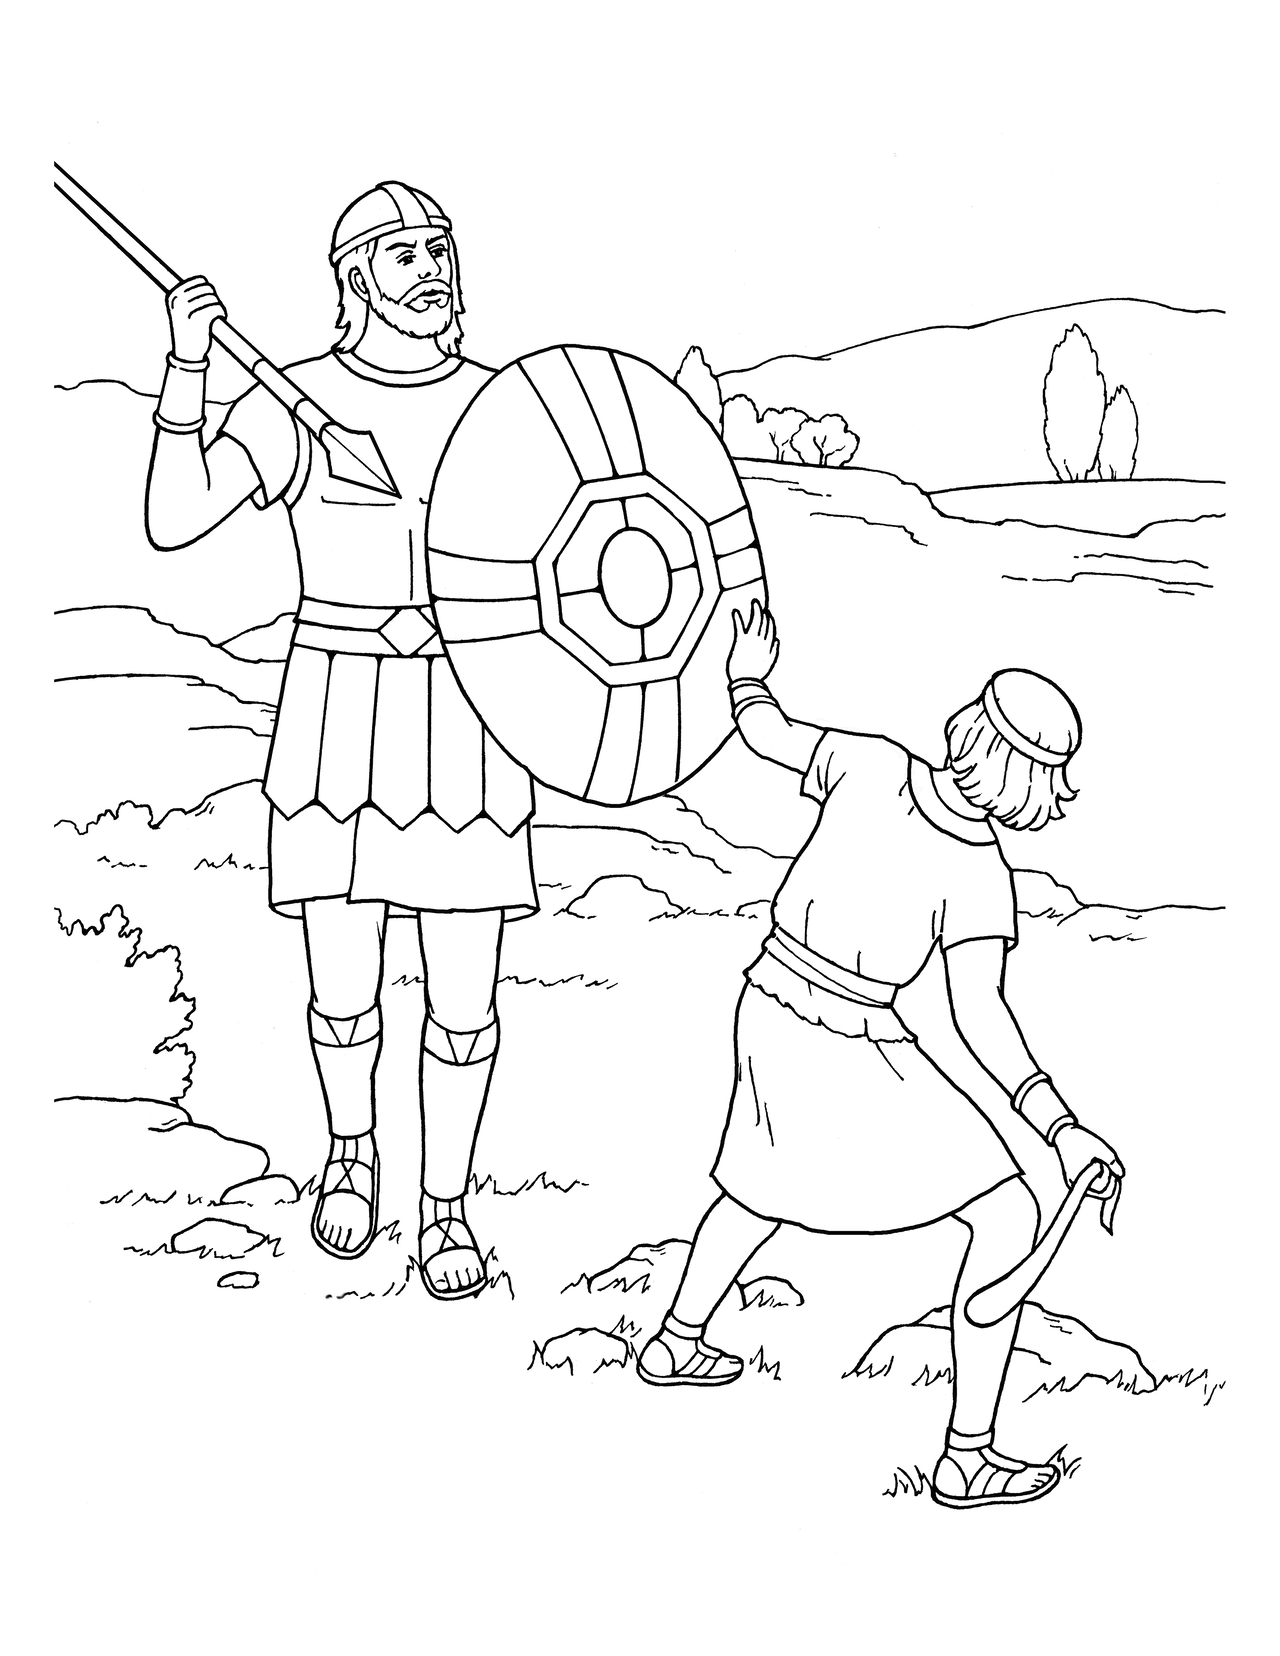 bible coloring pages david and goliath